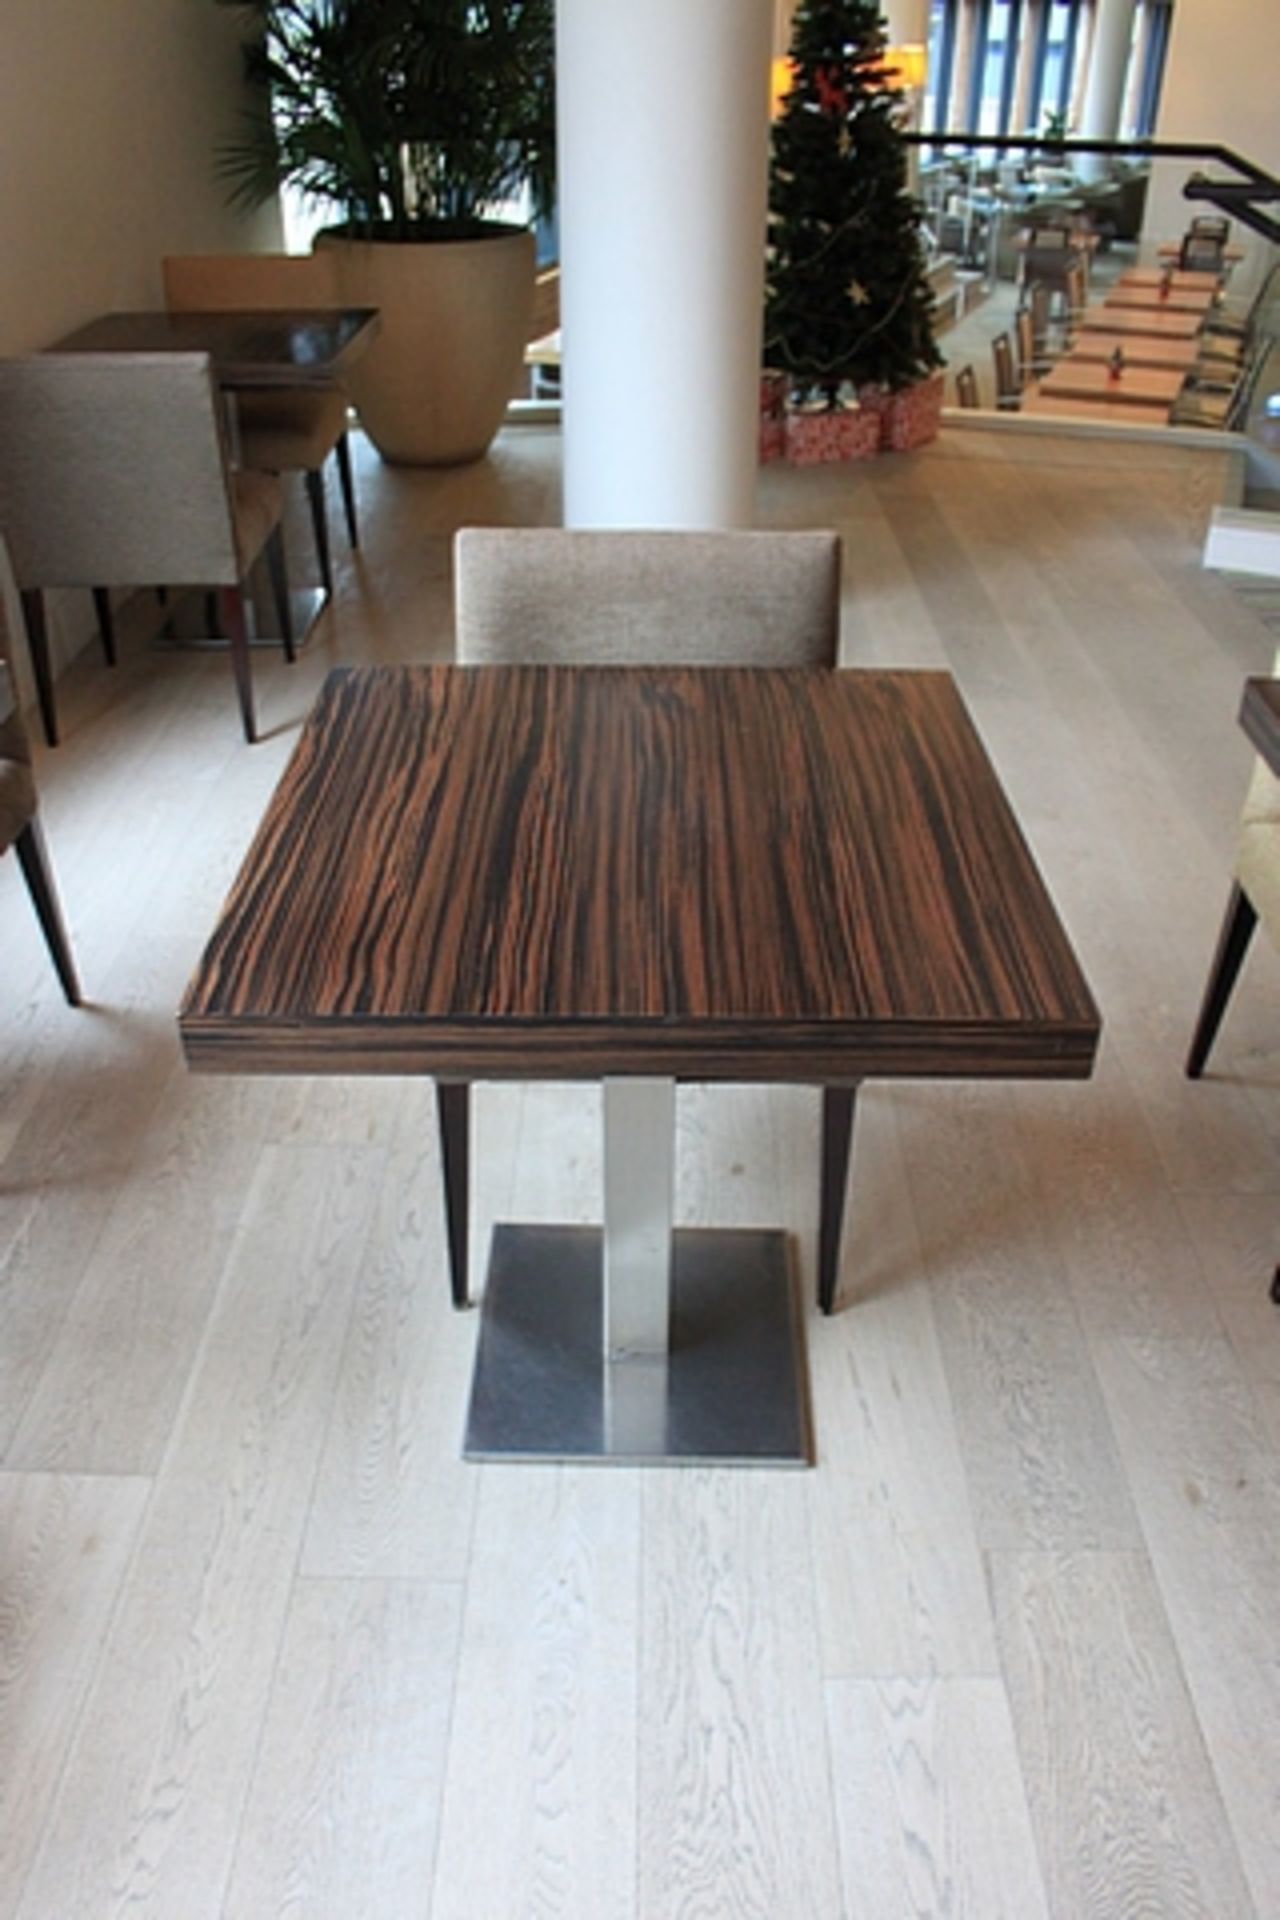 Kesterport Square Dining Table Ebony Top With 60mm Deep Edge. Pedestal & Base Brushed Stainless - Image 3 of 3